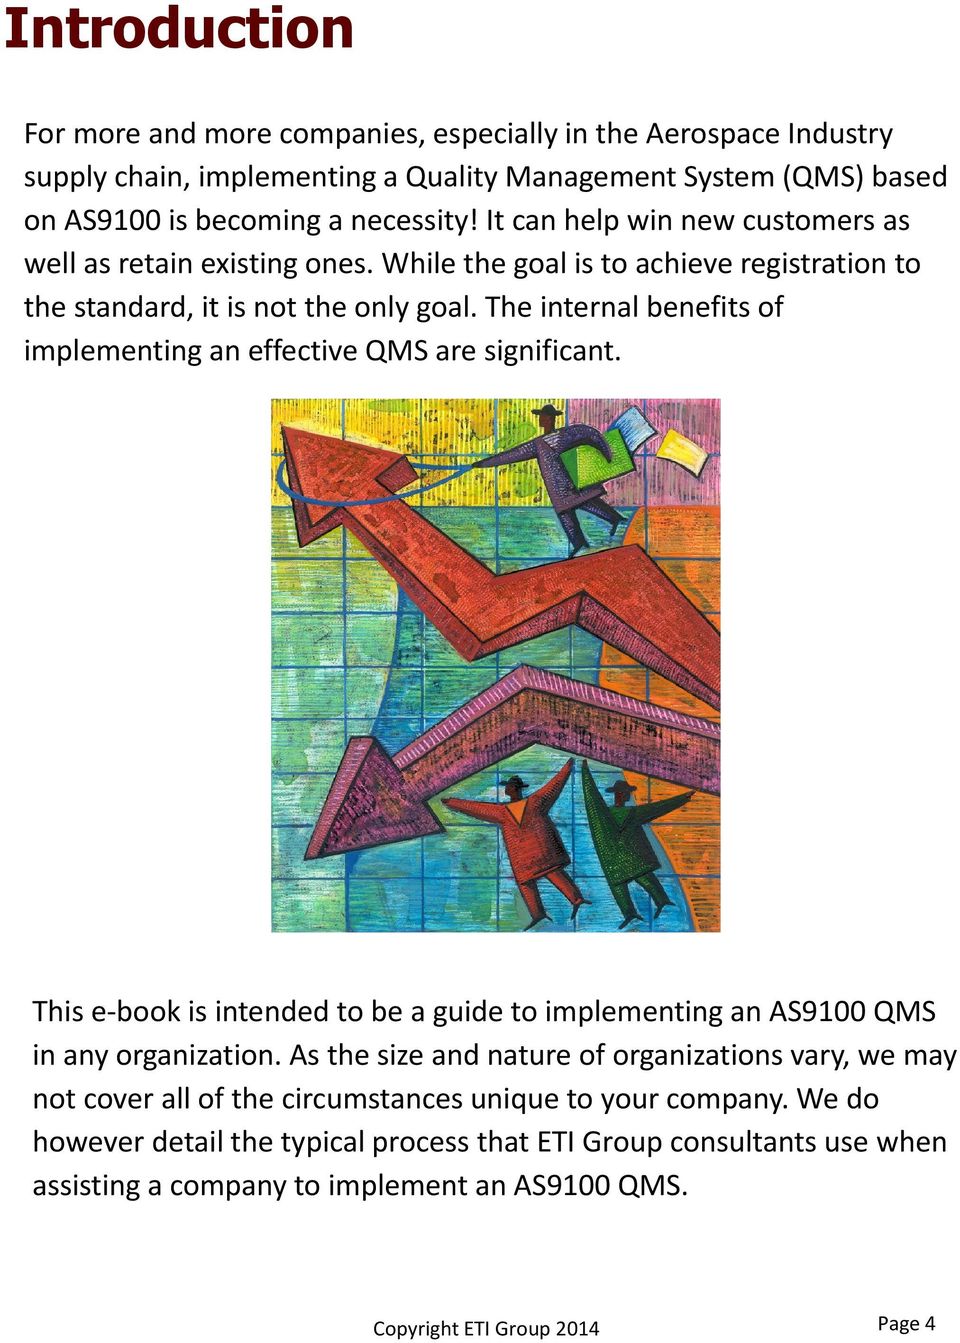 The internal benefits of implementing an effective QMS are significant. This e book is intended to be a guide to implementing an AS9100 QMS in any organization.